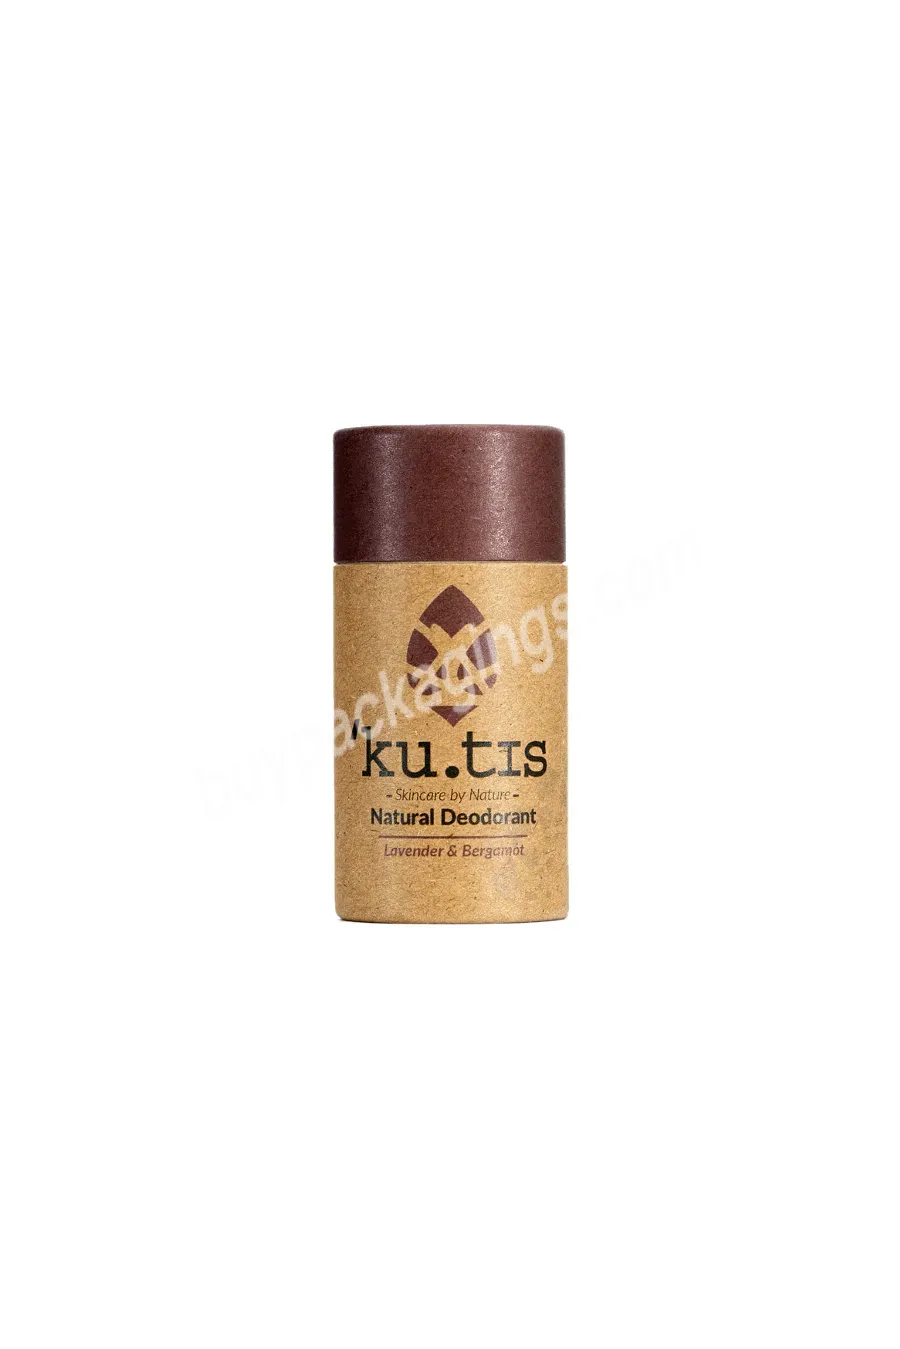 Custom Eco Friendly Cardboard Push Up Kraft Paper Tube For Lip Balm Stick Container Biodegradable Cylindrical Box Packaging - Buy Tube For Lip Balm,Eco Friendly Cardboard Push Up Kraft Paper Tube,Lip Balm Stick Container.